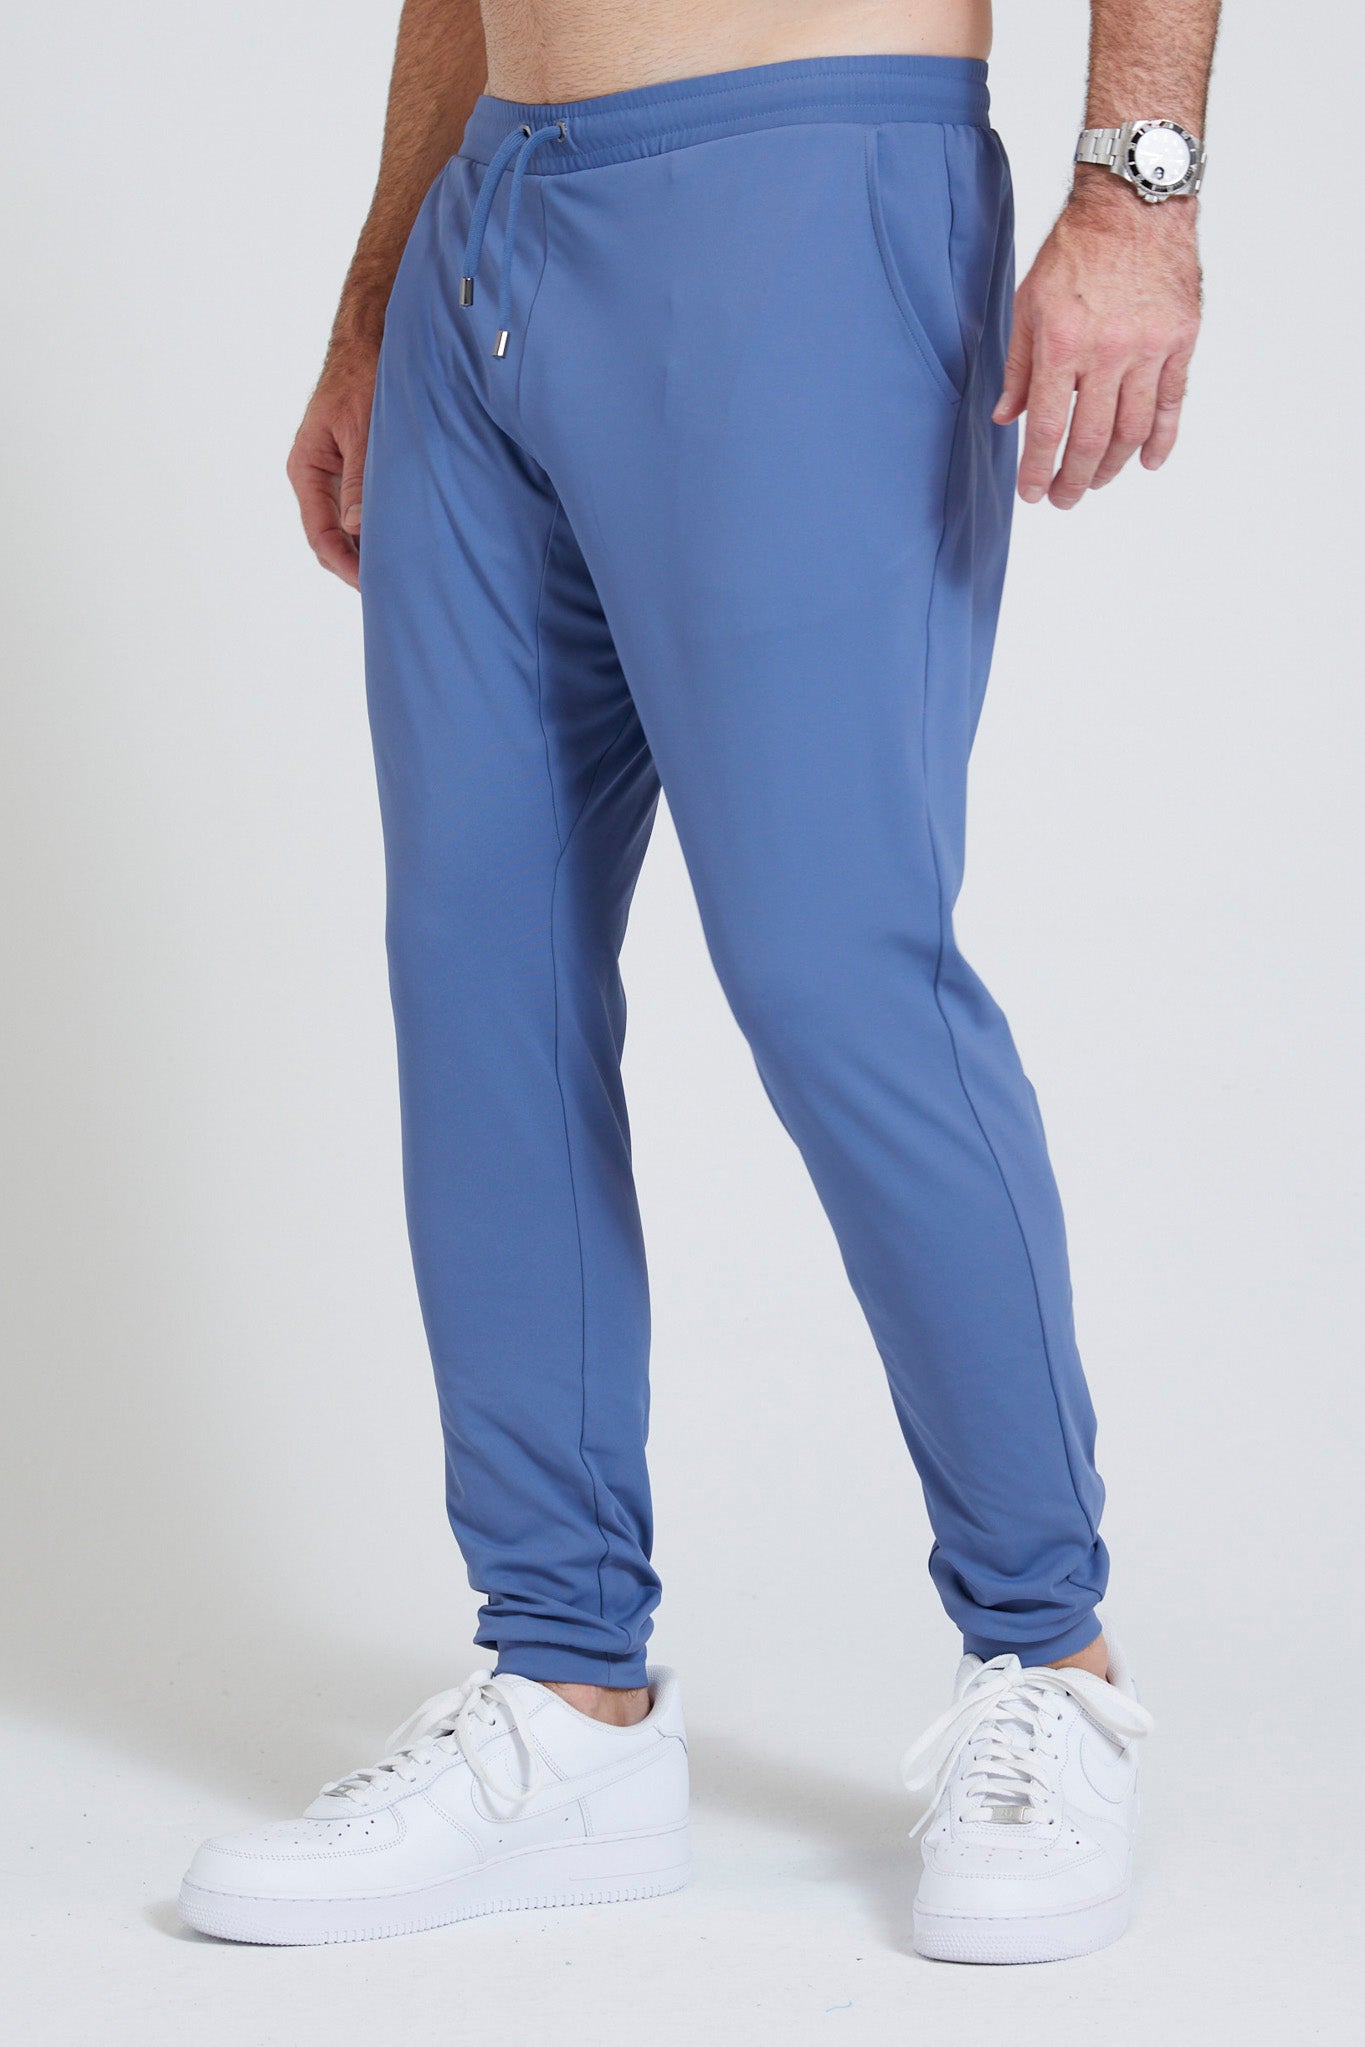 Image of the donahue jogger in blue horizon ss23